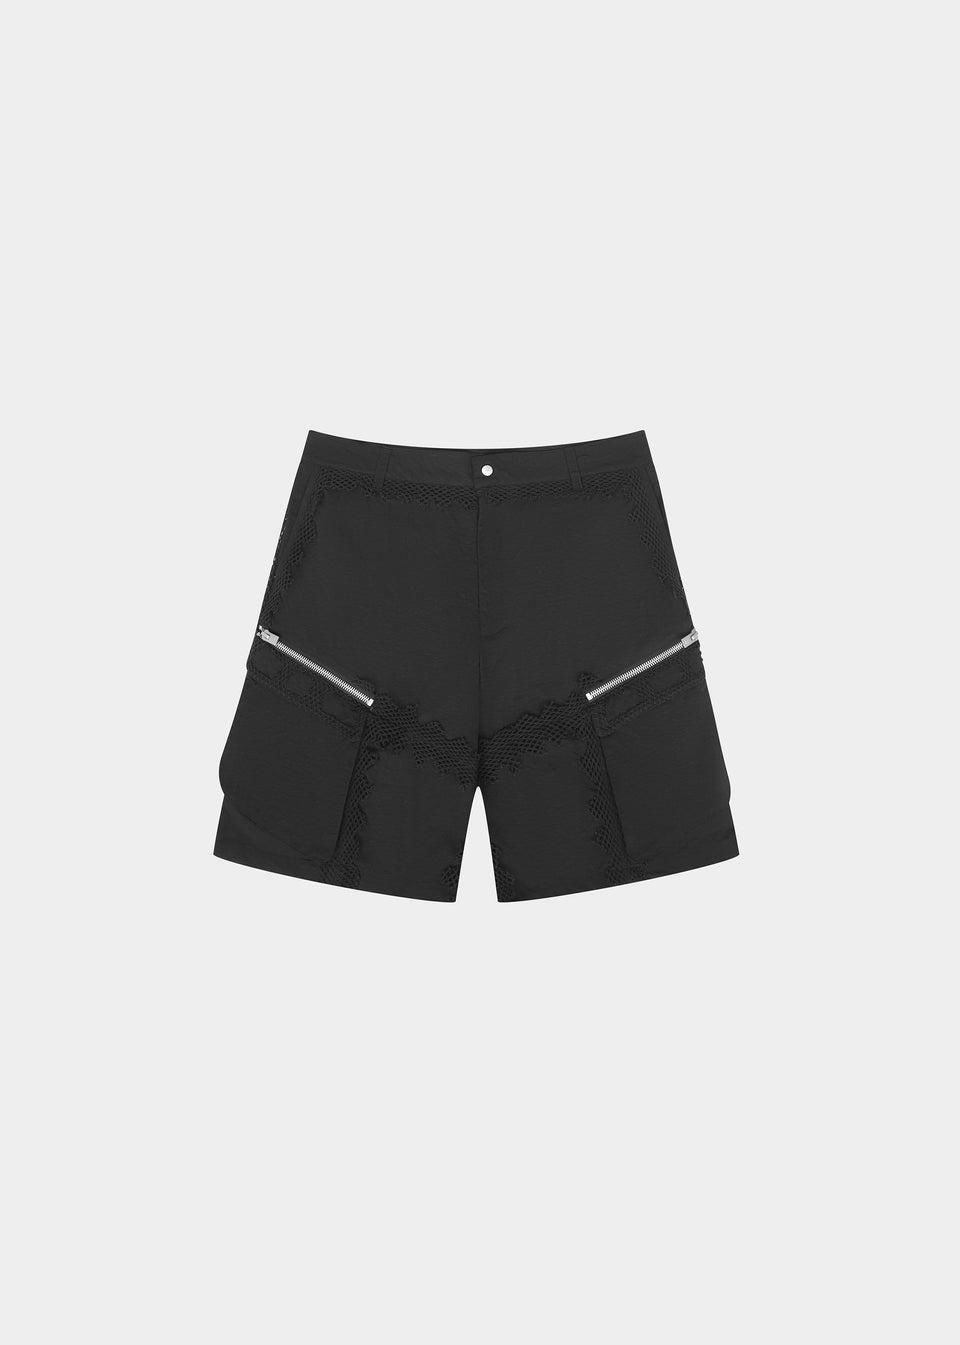 SPHERICAL CARGO SHORTS by HELIOT EMIL